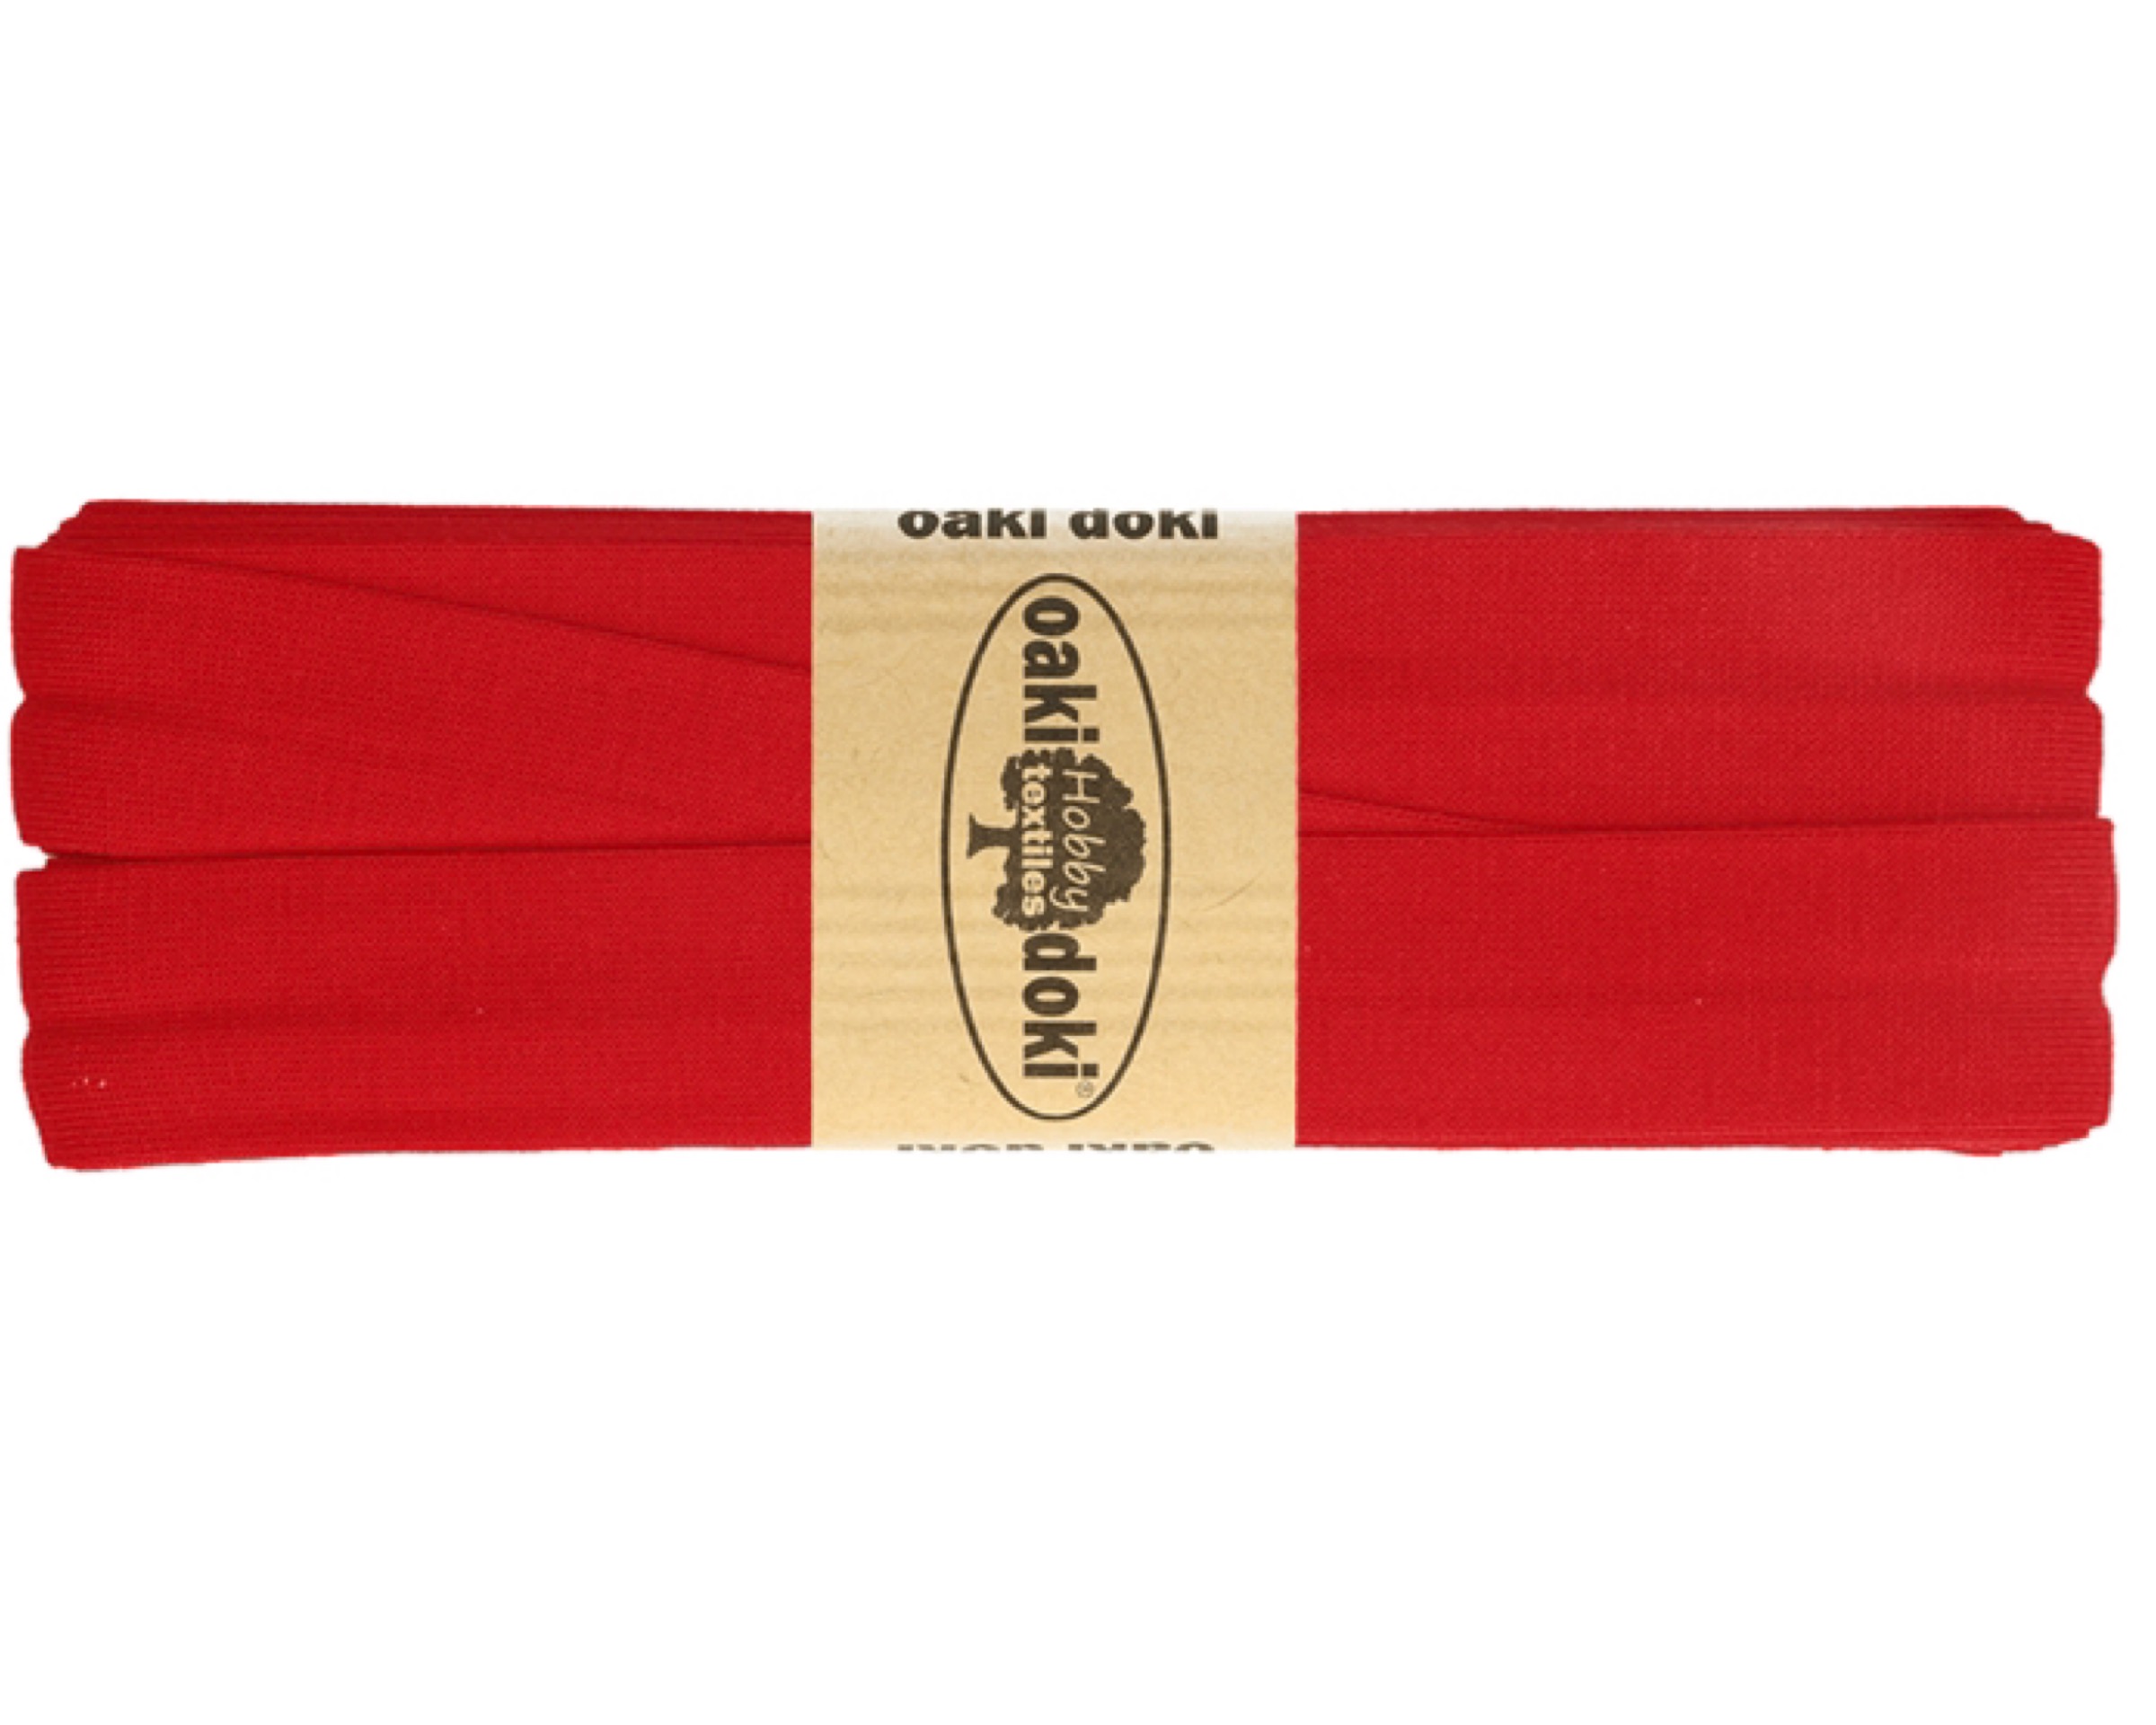 Biaisband tricot de luxe 20 mm 3m – Nr.620 rood